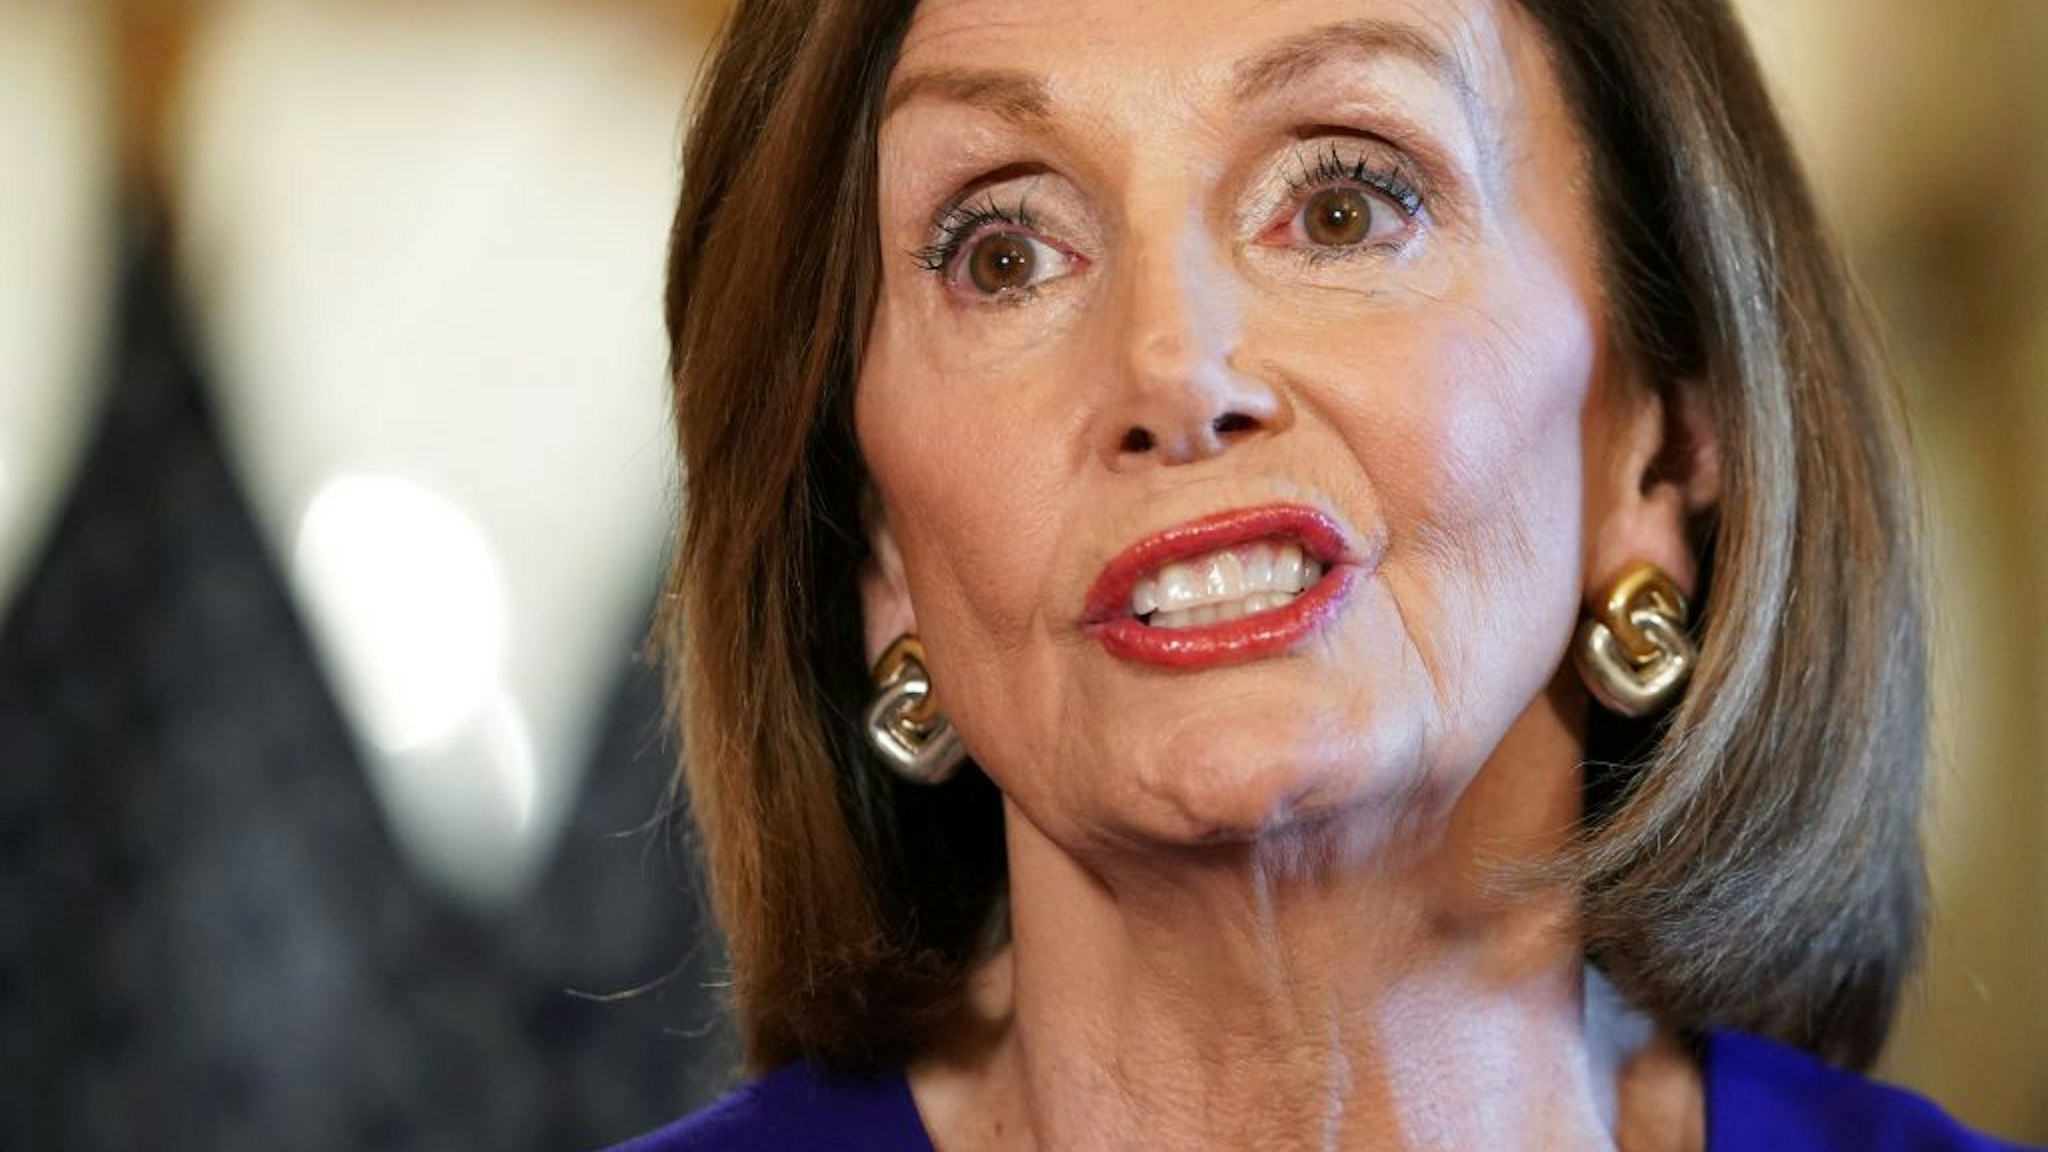 US Speaker of the House Nancy Pelosi, Democrat of California, announces a formal impeachment inquiry of US President Donald Trump on September 24, 2019, in Washington, DC. - Amid mounting allegations of abuse of power by the US president, Pelosi announced the start of the inquiry in the House of Representatives, the first step in a process that could ultimately lead to Trump's removal from office. (Photo by MANDEL NGAN / AFP) (Photo credit should read